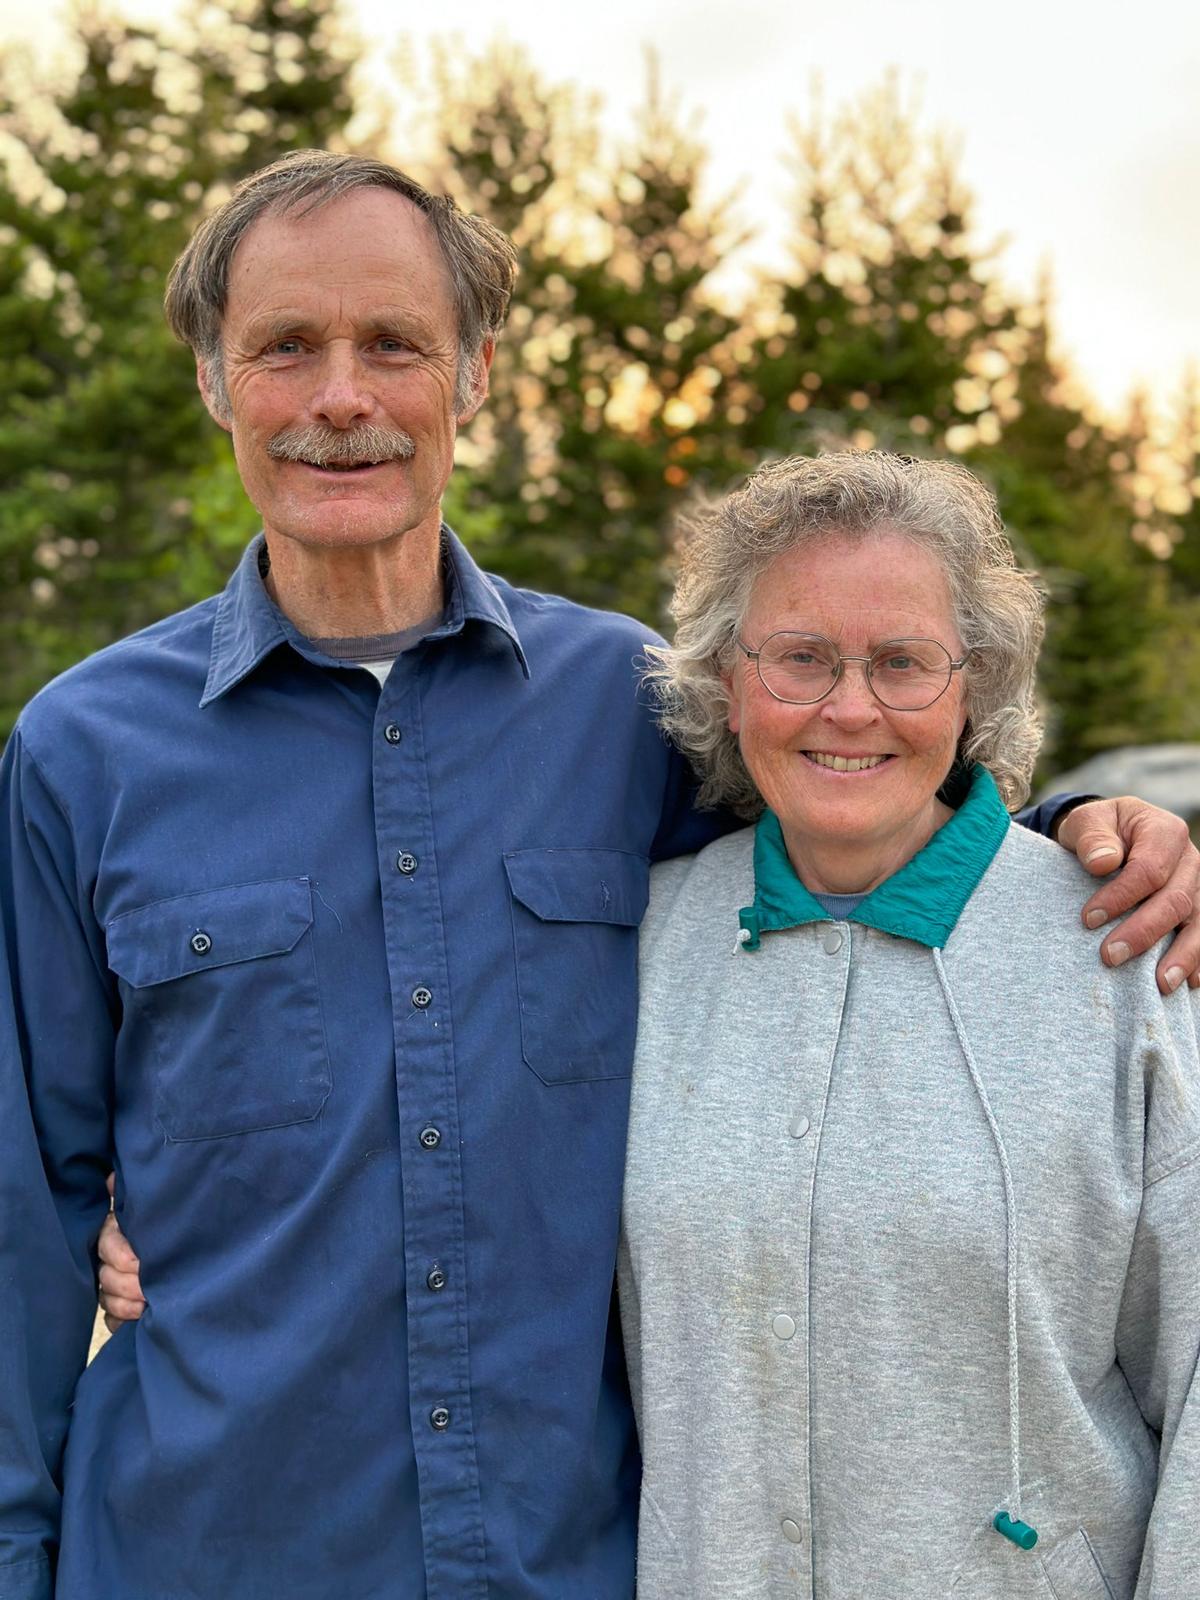 Ron Melchiore with his wife, Johanna. Their book "<a href="https://selfsufficient-backyard.com/my-book/">The Self-Sufficient Backyard for Independent Homesteaders</a>" has sold close to 200,000 copies. (Courtesy of Ron Melchiore)